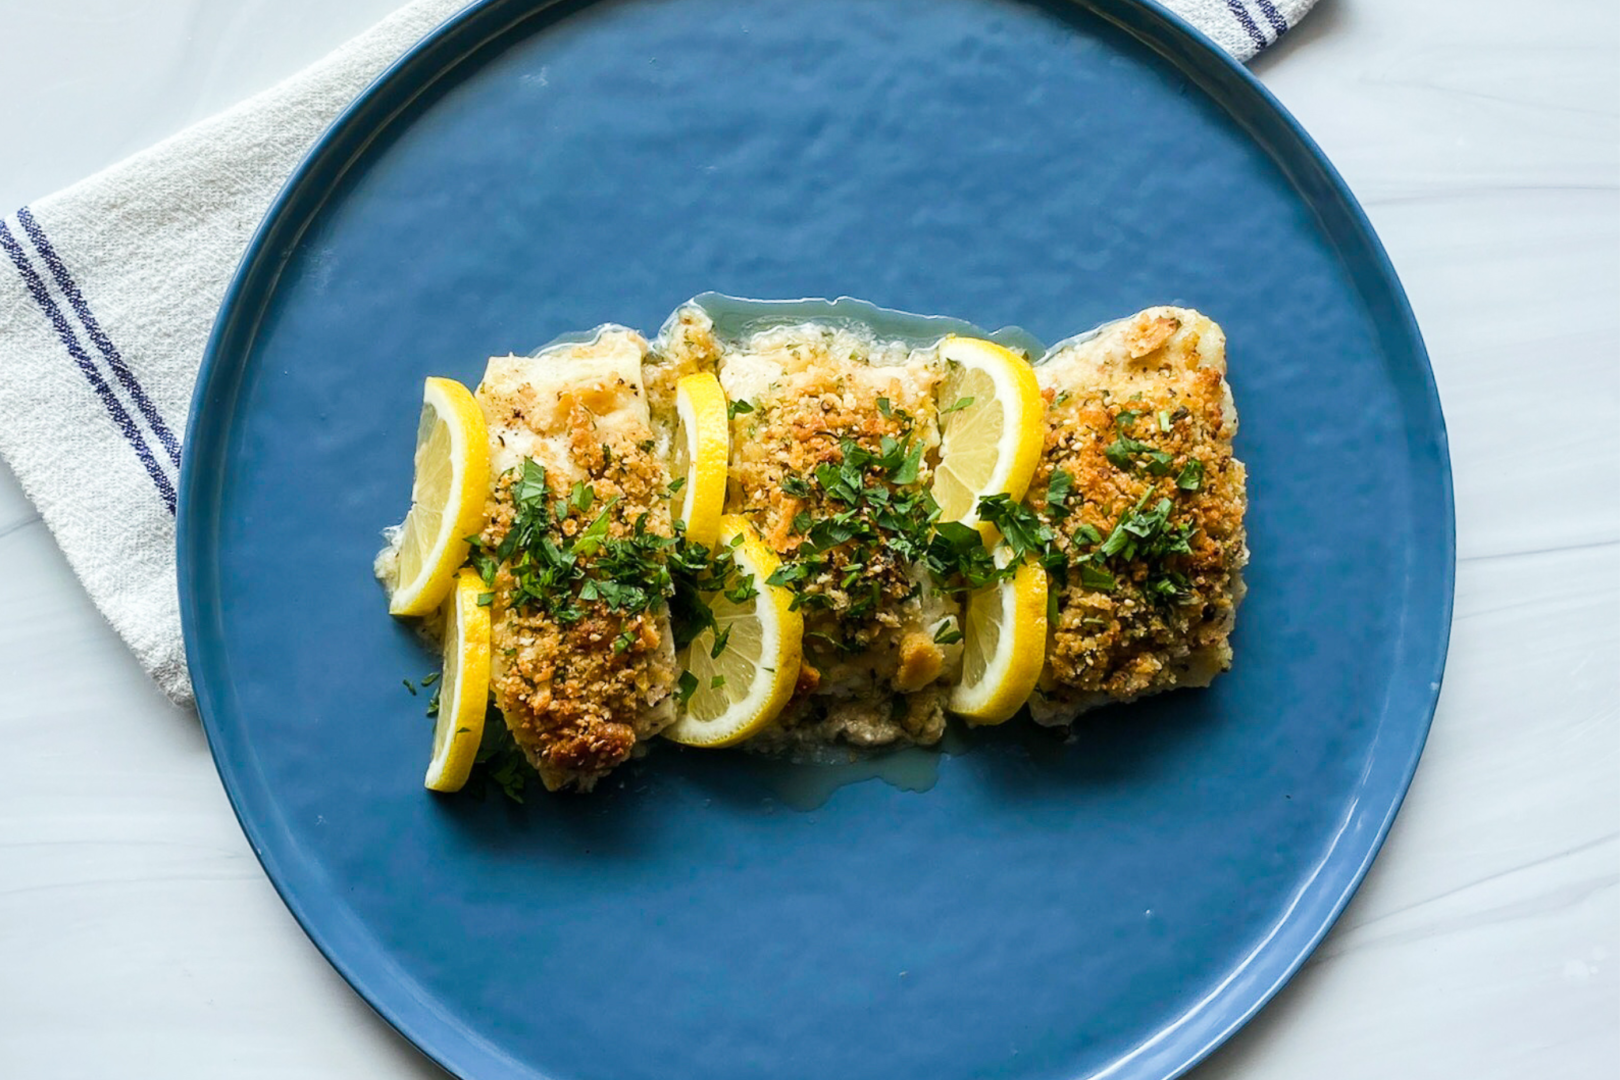 BAKED COD WITH CRACKER CRUMBS